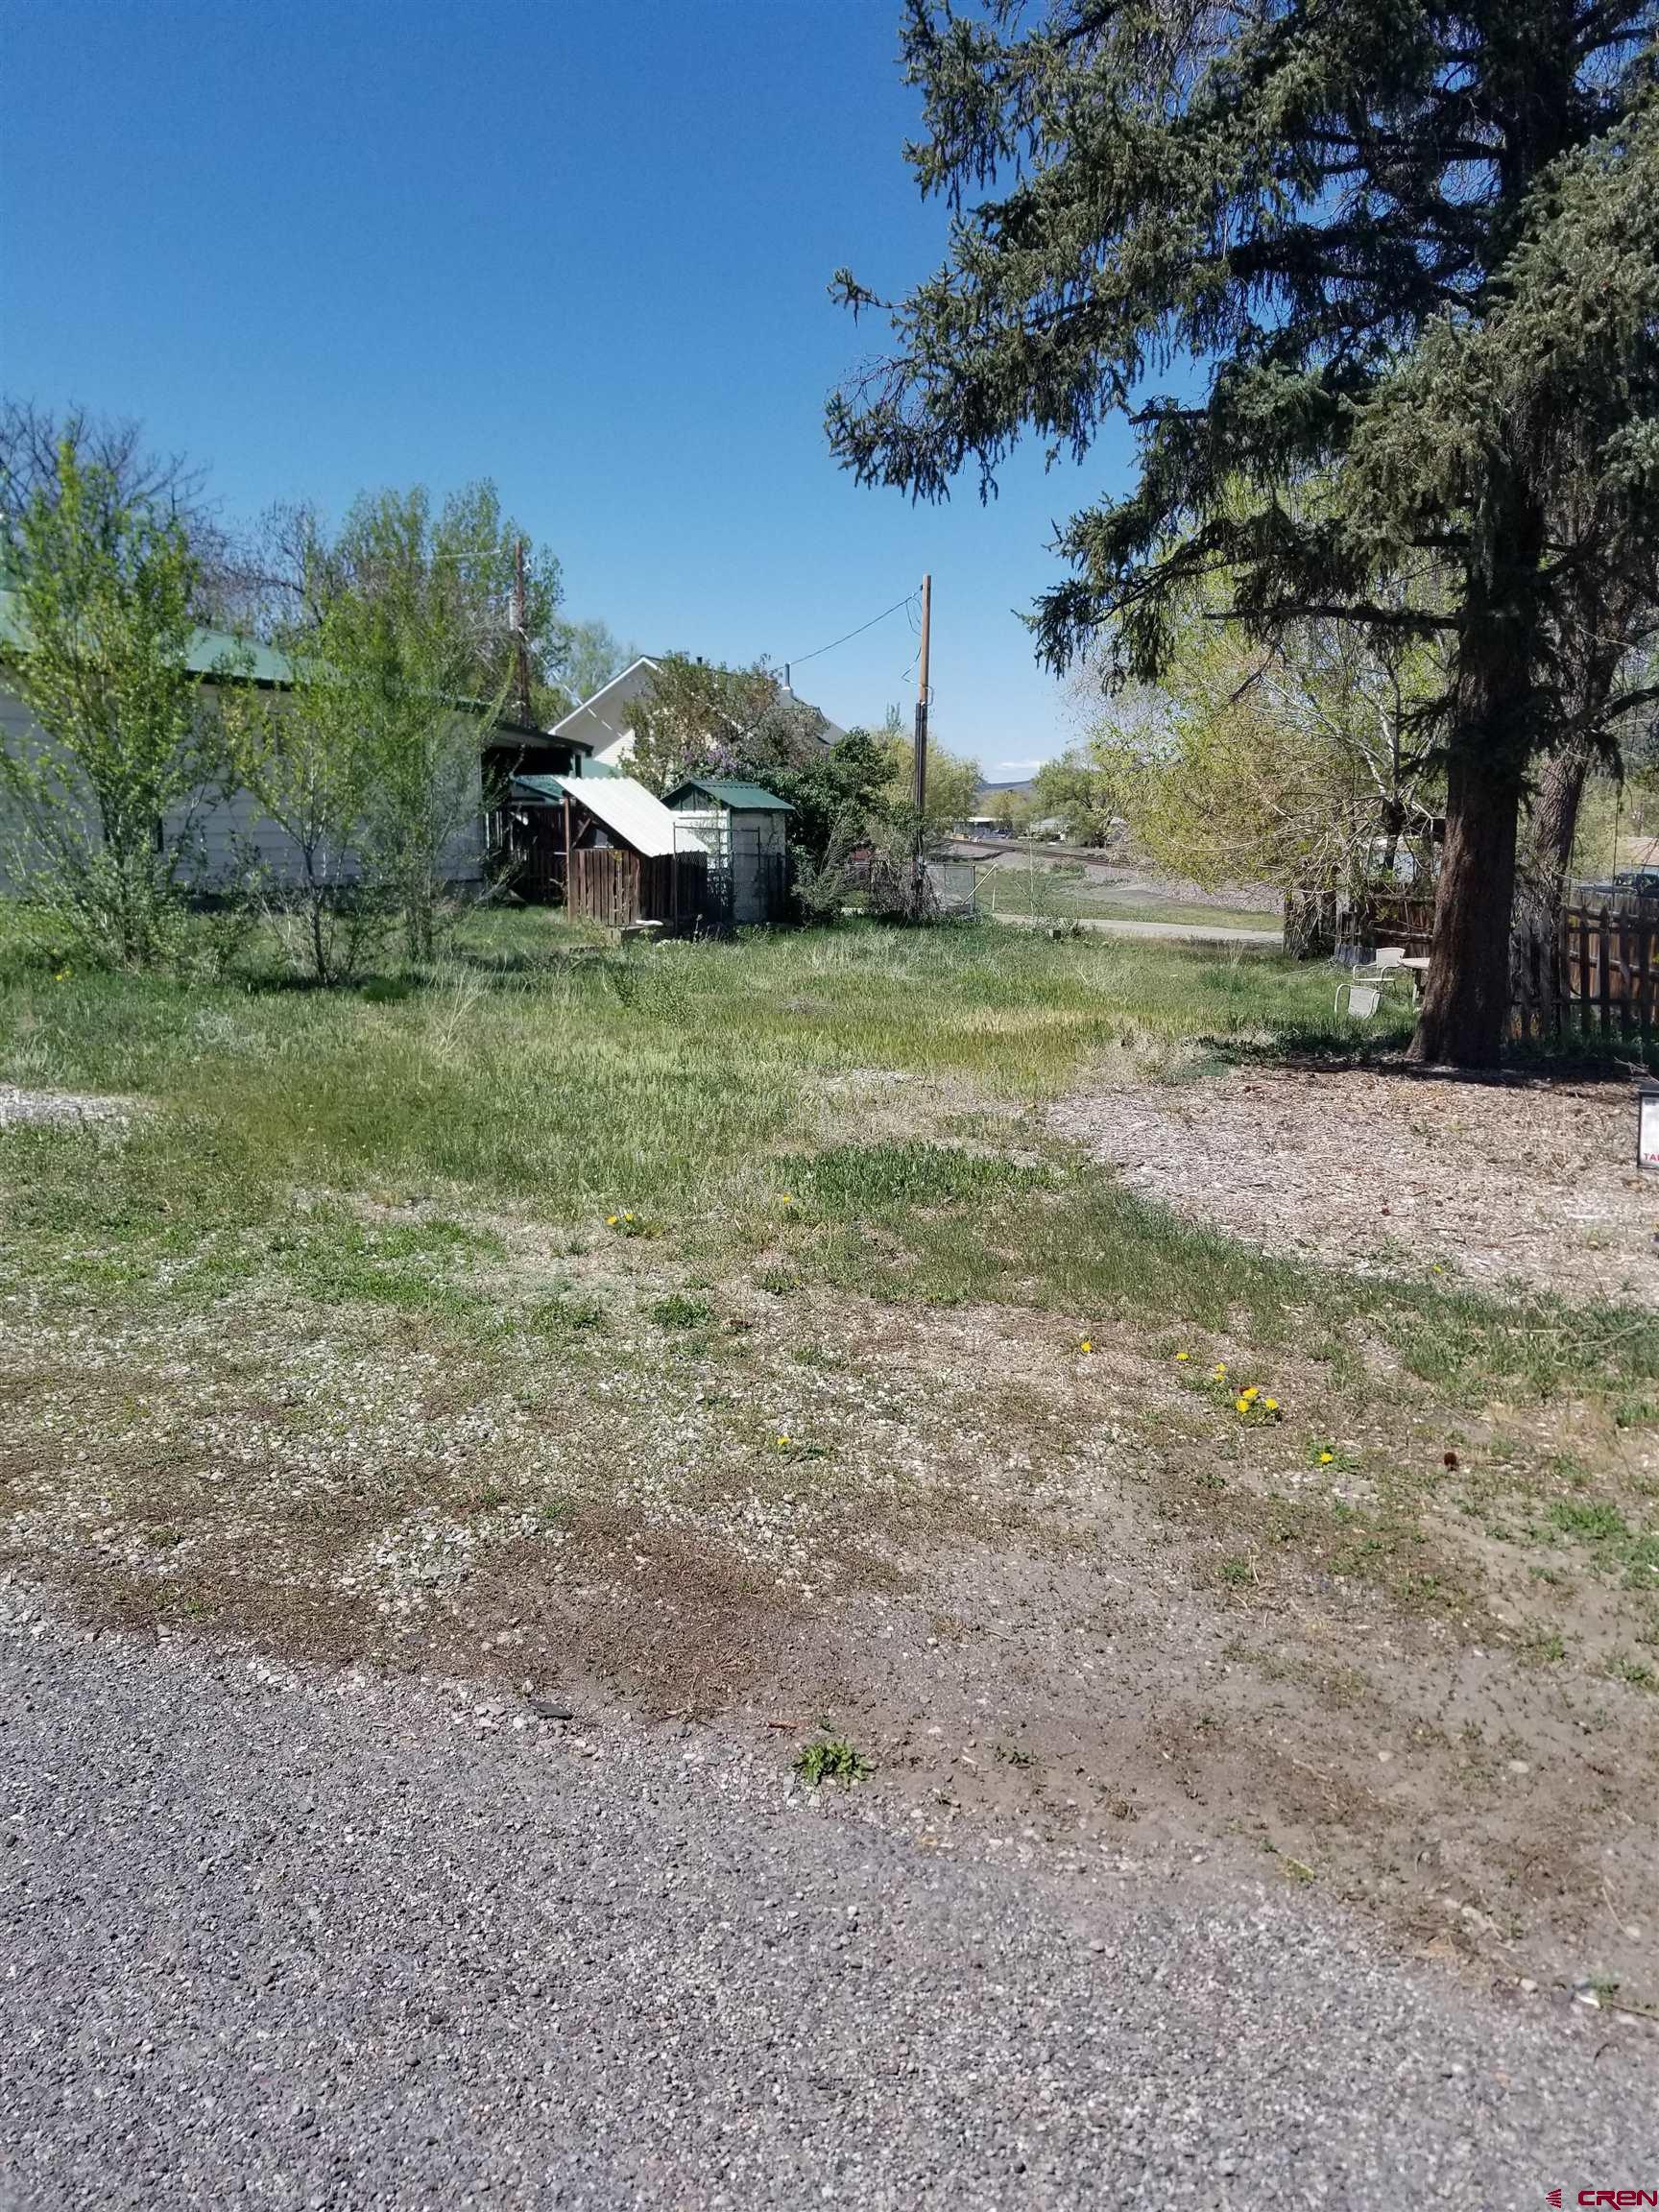 Rare opportunity to purchase a vacant lot in Paonia! Water and sewer taps installed. Electric and gas are on the property. High-speed internet, 0.3 mile to retail shops, restaurants, grocery, movie theater, live music. Paonia is home to many events throughout the year and is well known for beautiful scenery, vineyards, orchards, organic fruit/vegetables, hunting, fishing, camping, the list goes on and on. Tuesday night Arbol Farmer's Market and Louie's Blues Jam on Wednesday nights are a couple of local favorites. Call today to get your foot in the Paonia real estate market.